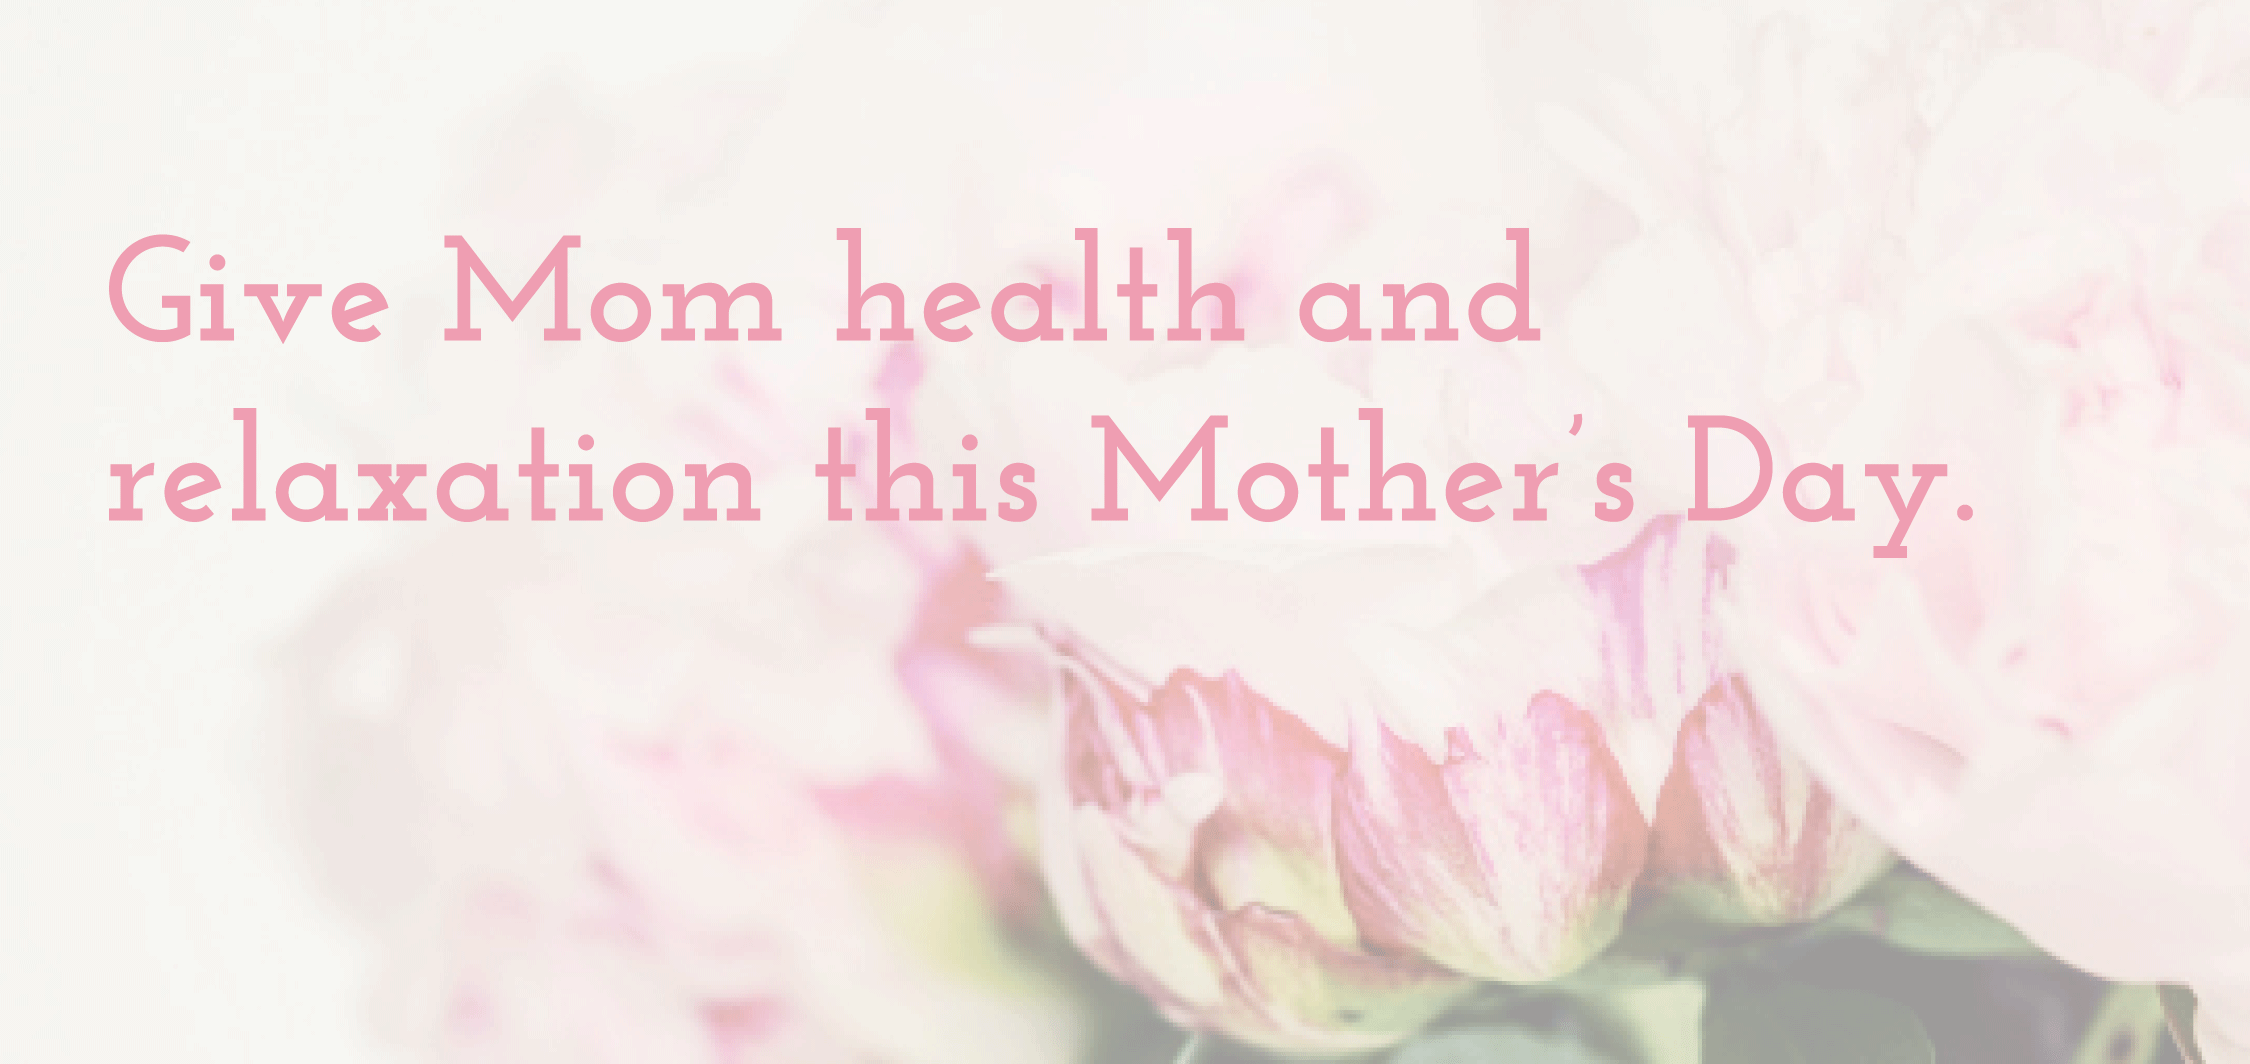 Give Mom health and relaxation this Mother’s Day!